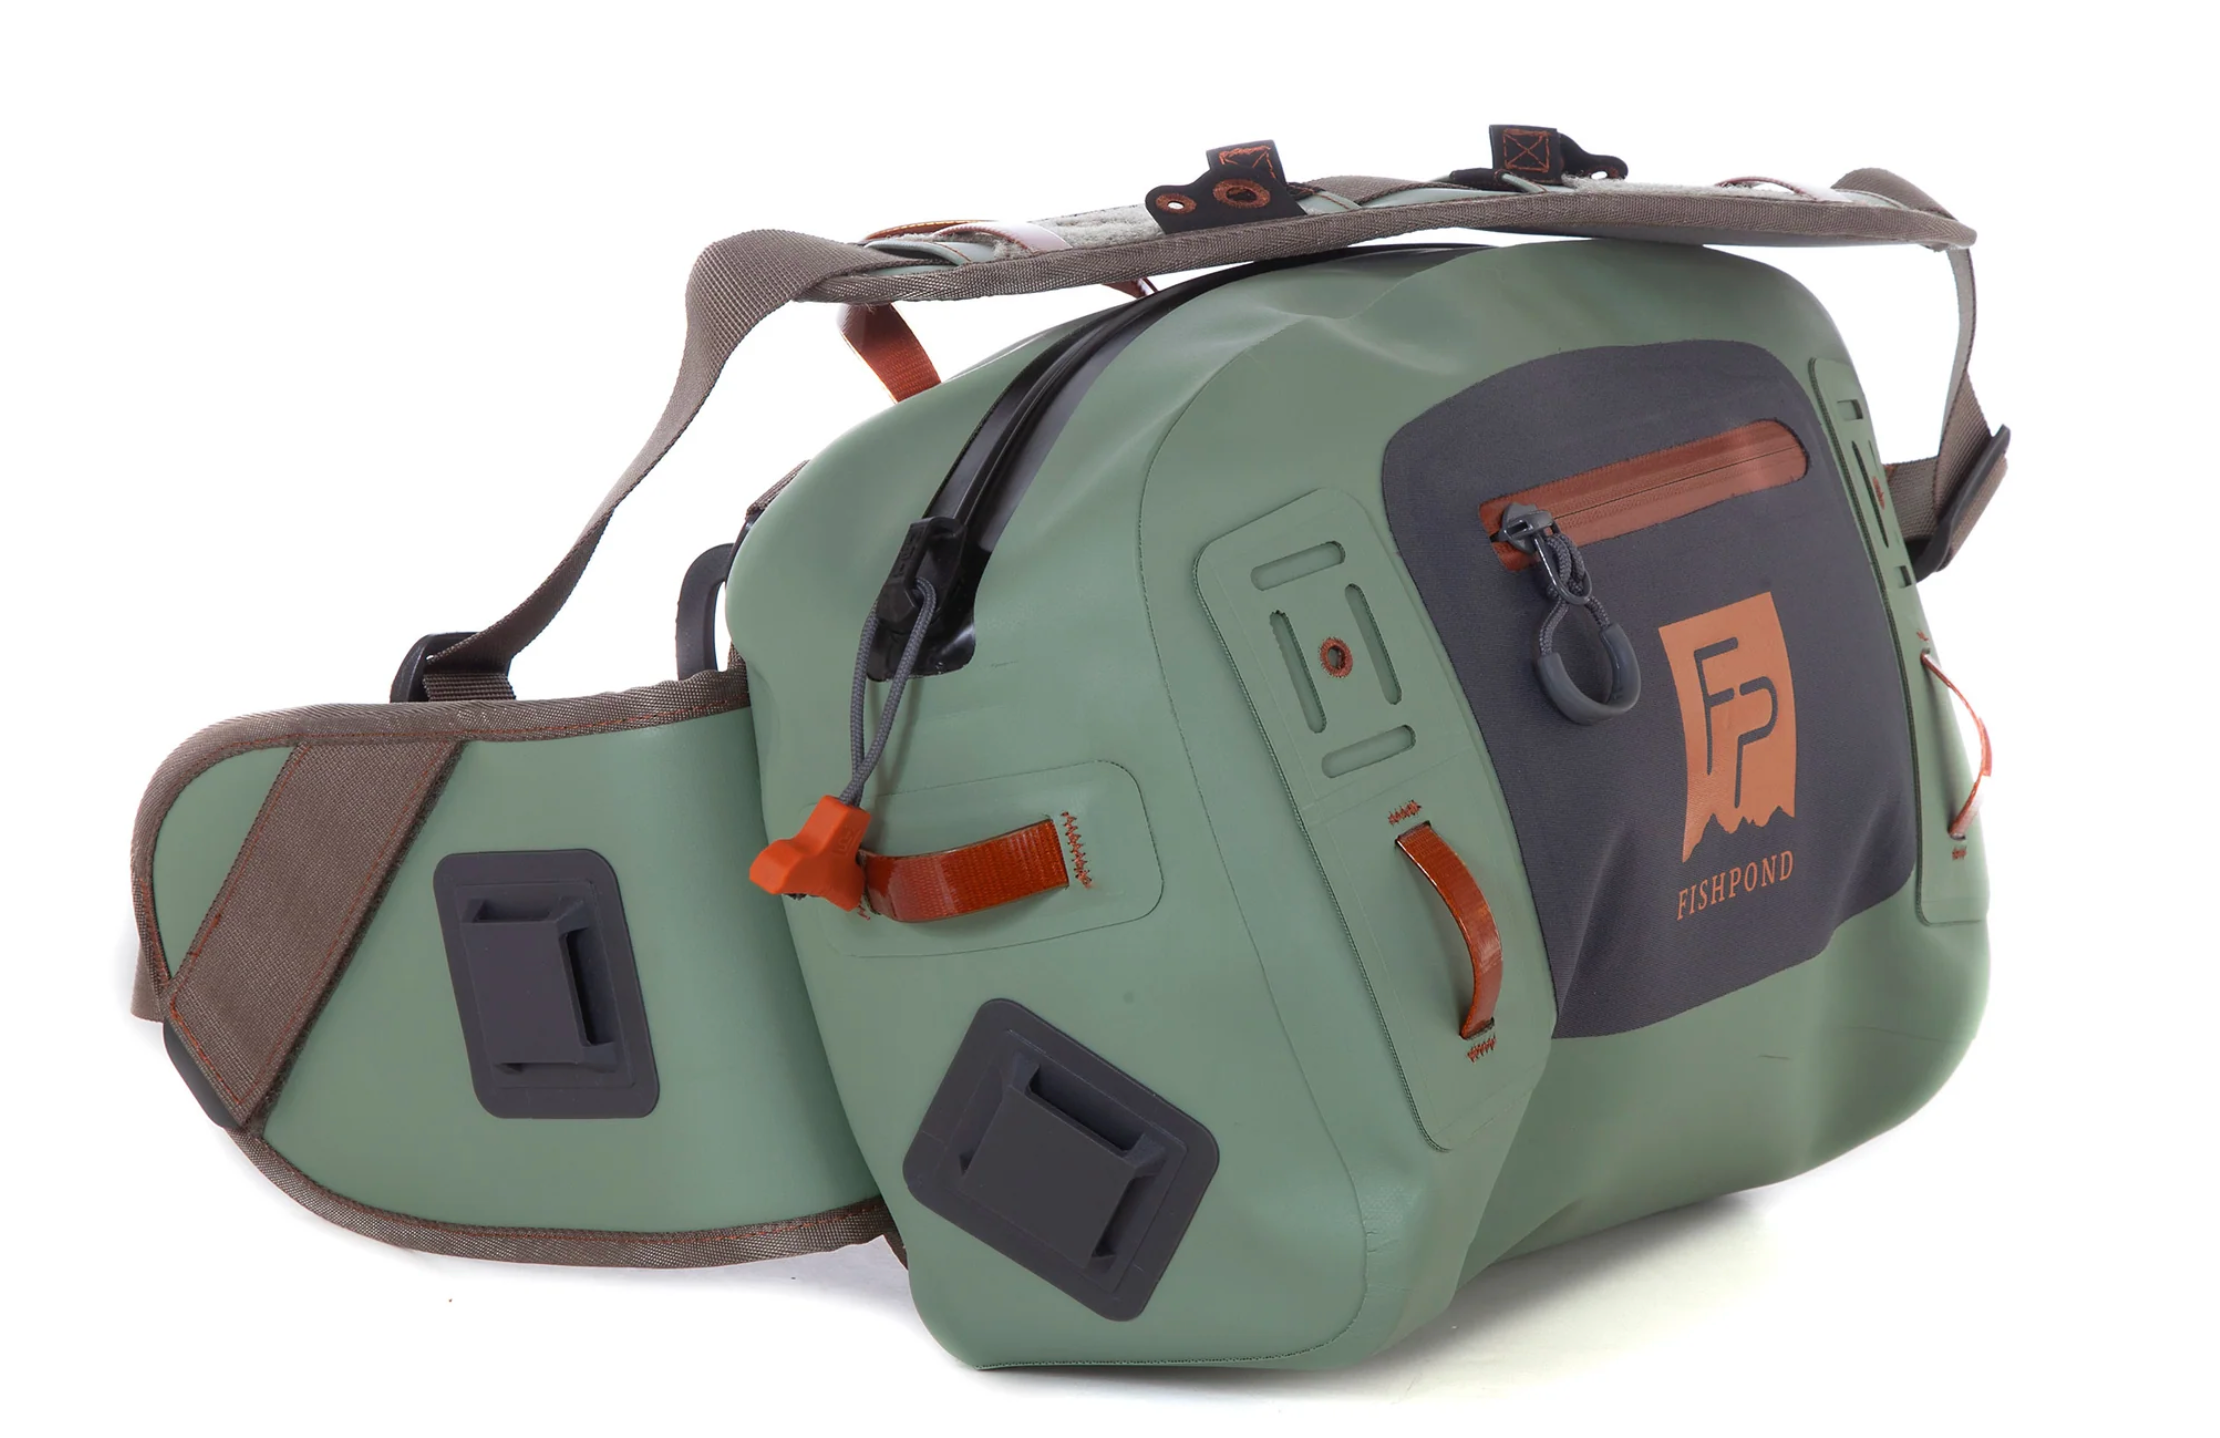 Fishpond Thunderhead Submersible Lumbar Pack - ECO YUCCA - Mansfield Hunting & Fishing - Products to prepare for Corona Virus